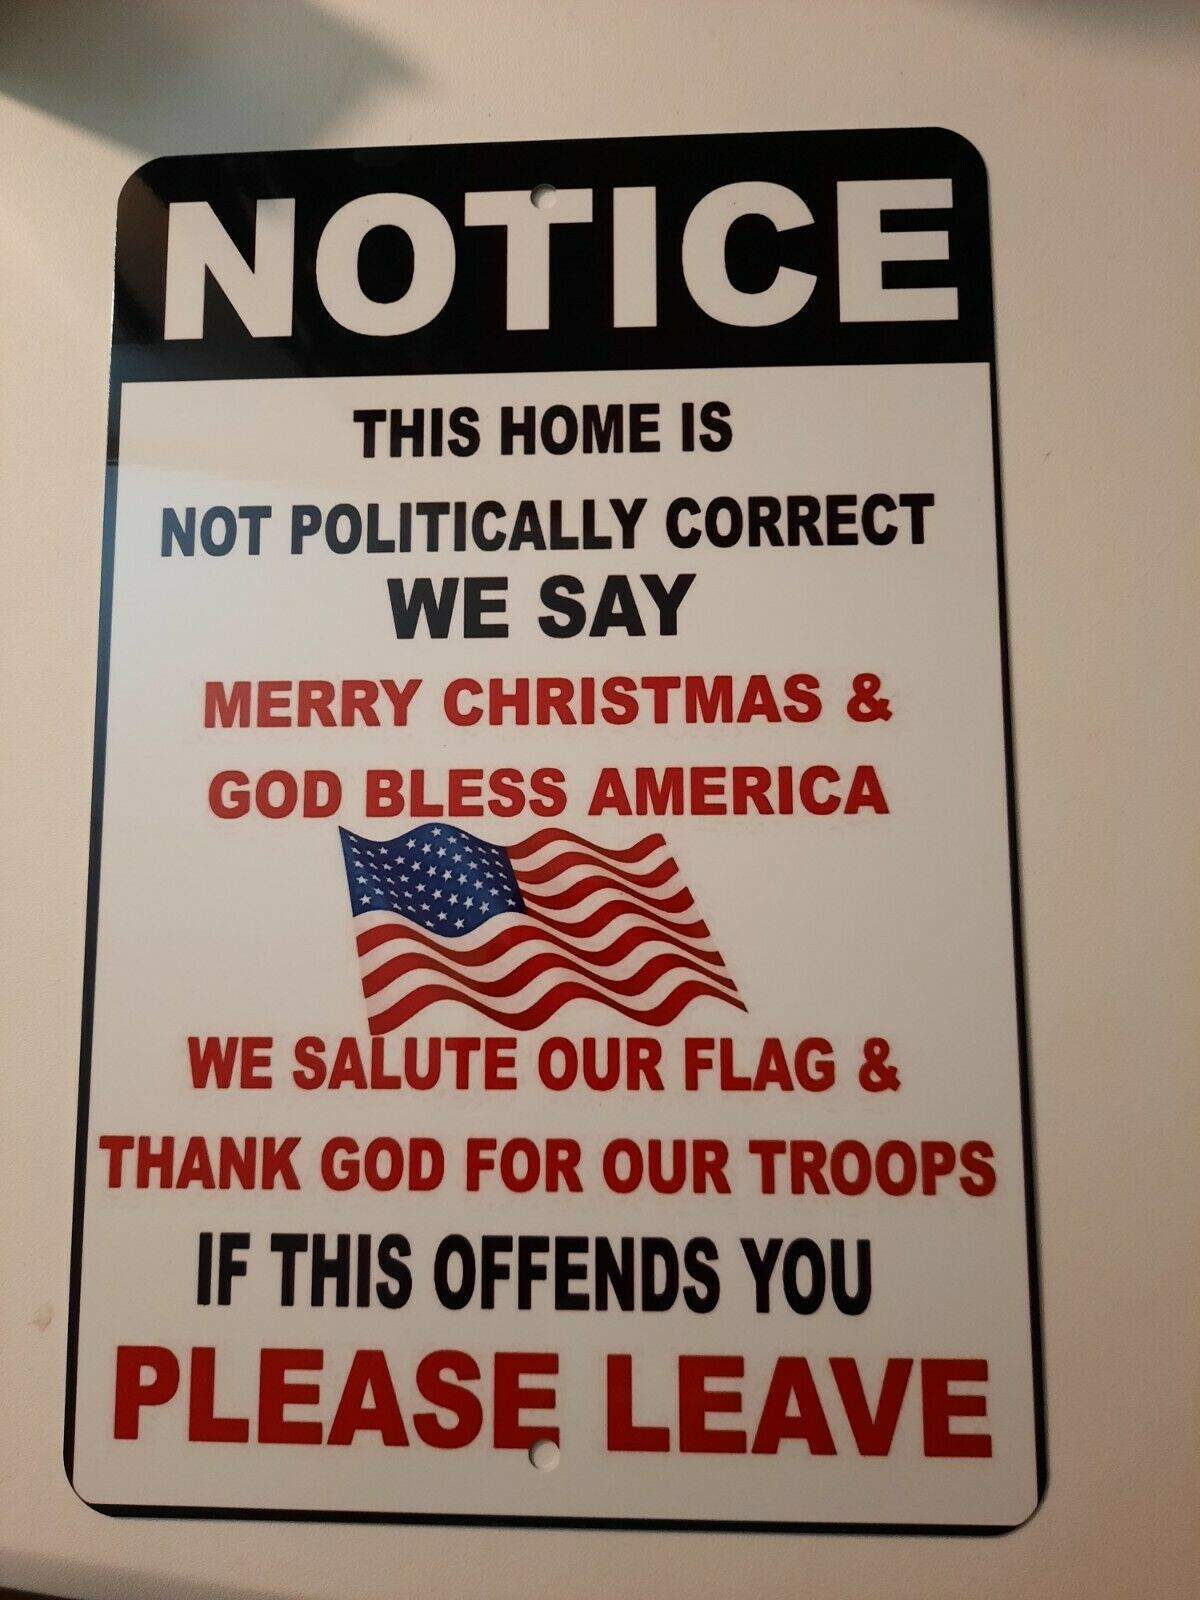 Notice This Home is NOT Politically Correct 8x12 Metal Wall Sign Military USA